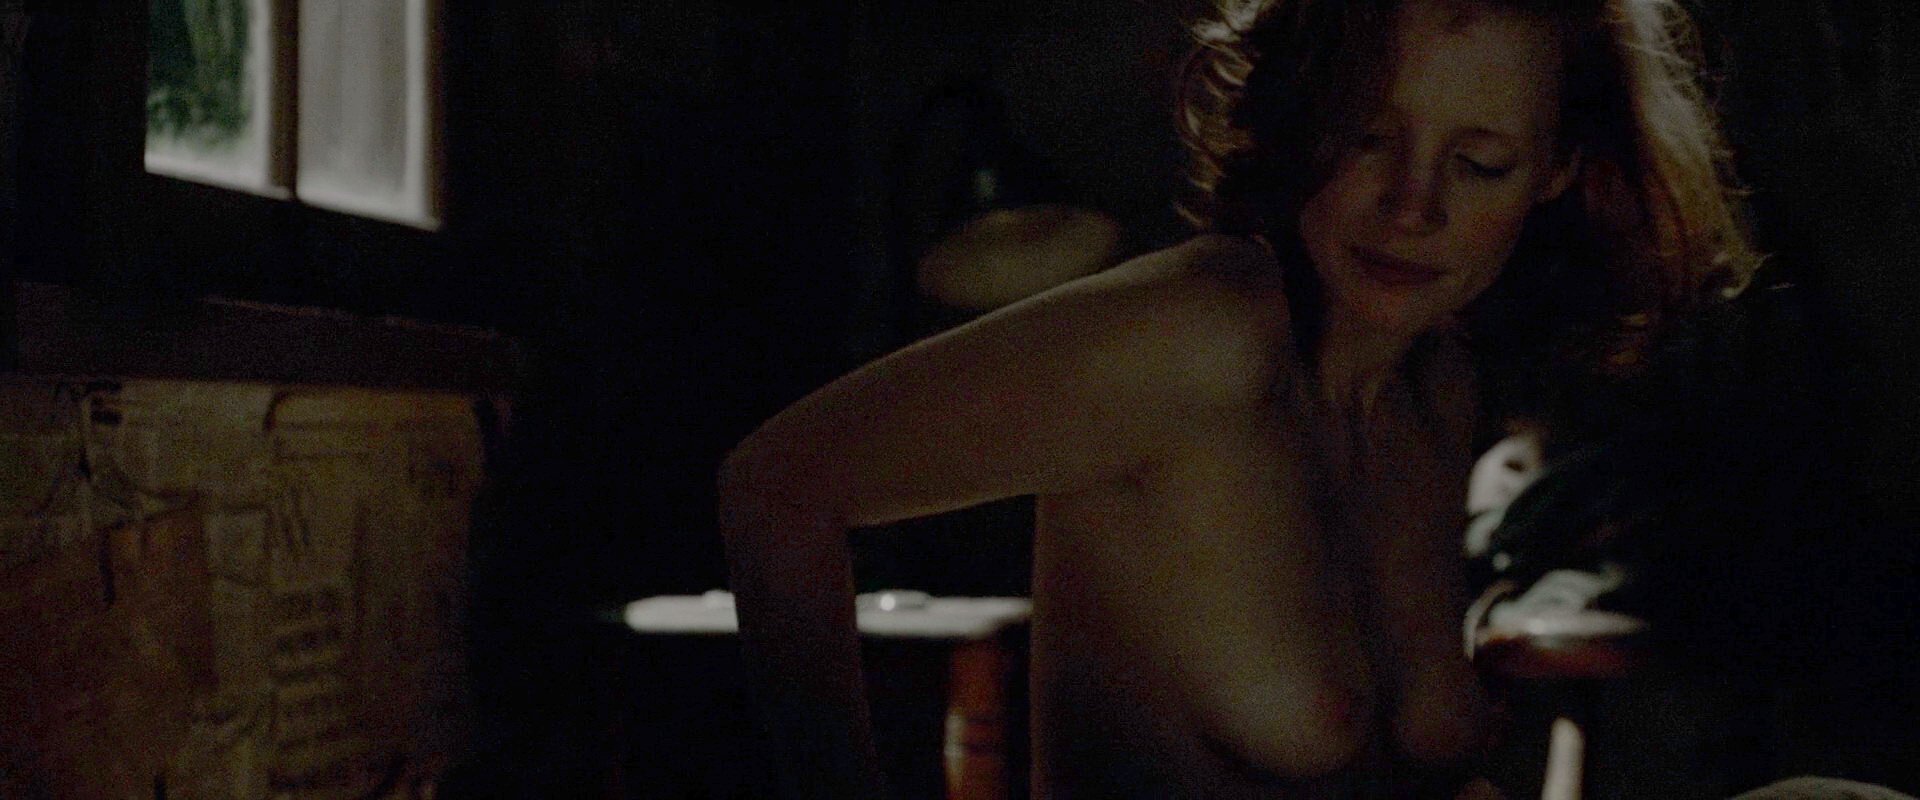 Jessica Chastain Nuda ~30 Anni In Lawless